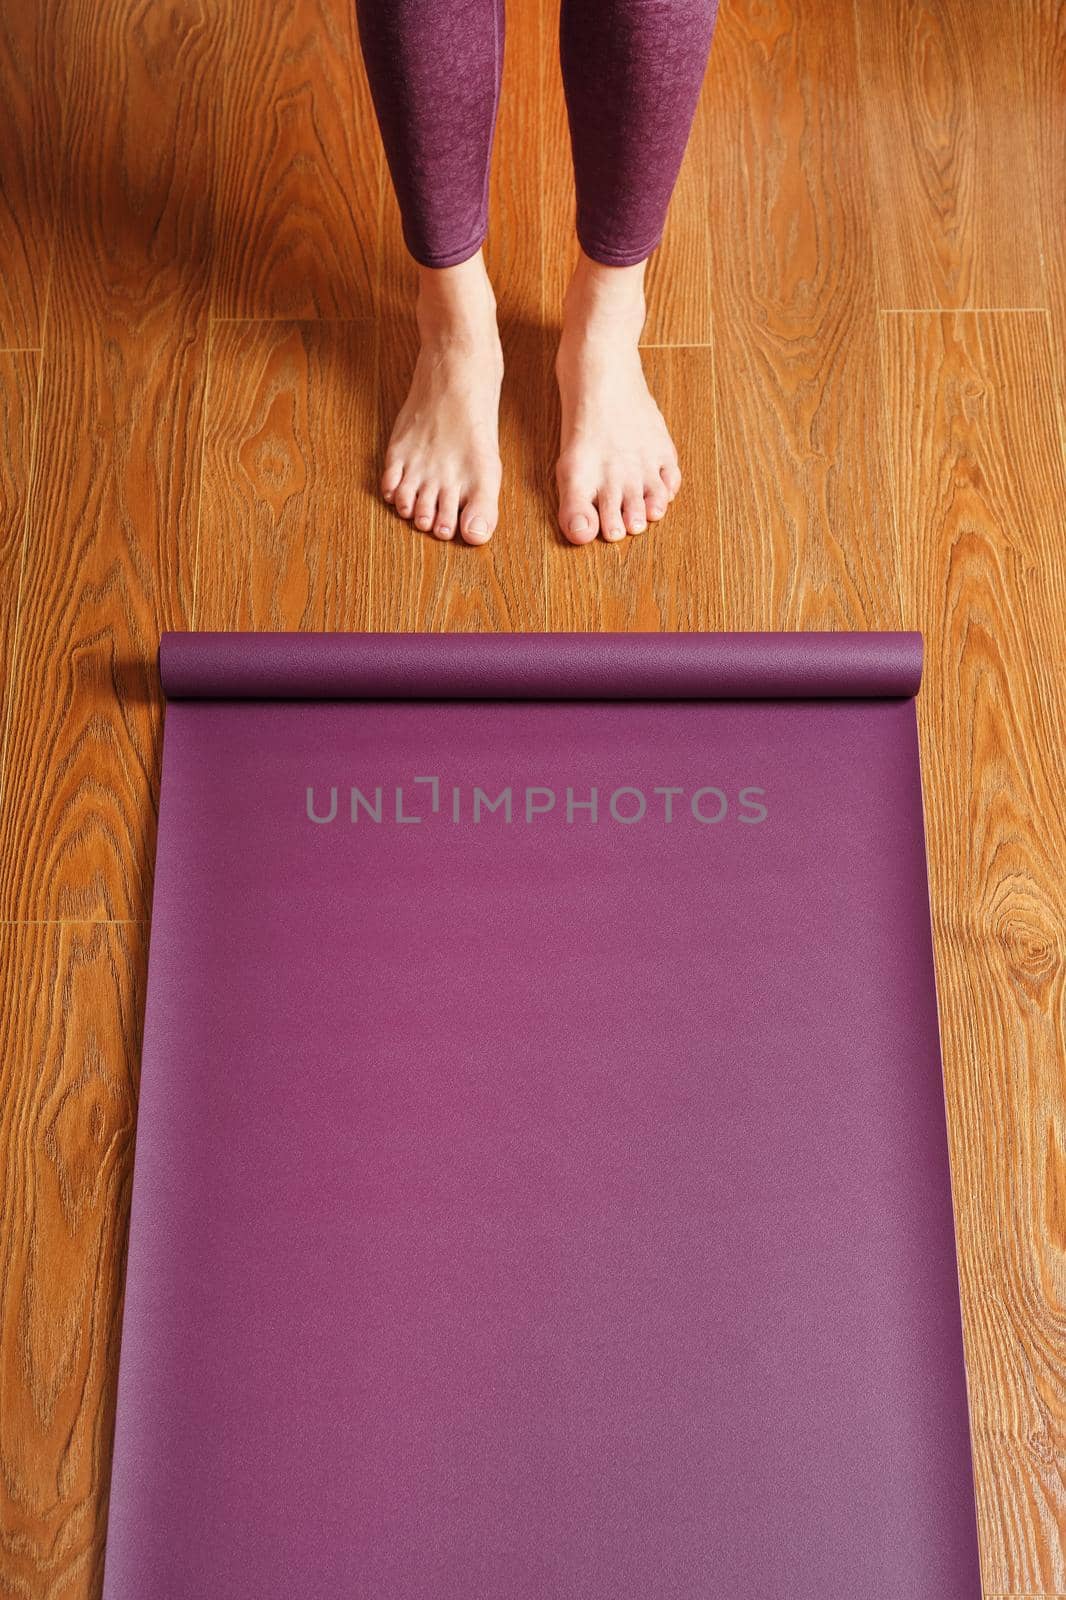 A woman lays out a lilac yoga mat on the wooden floor. by AlexGrec